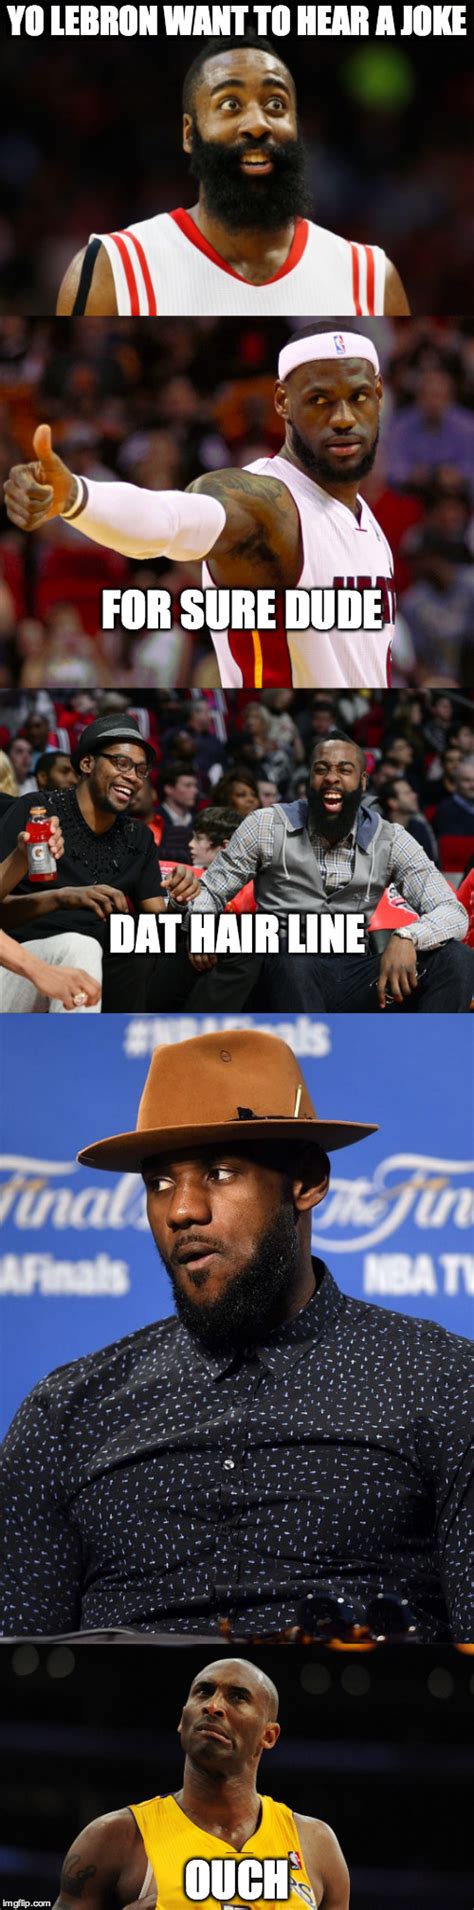 Friedman shut yo i fall in love with girls who got a matching hairline with lebron james looking self. Custom Image | Funny nba memes